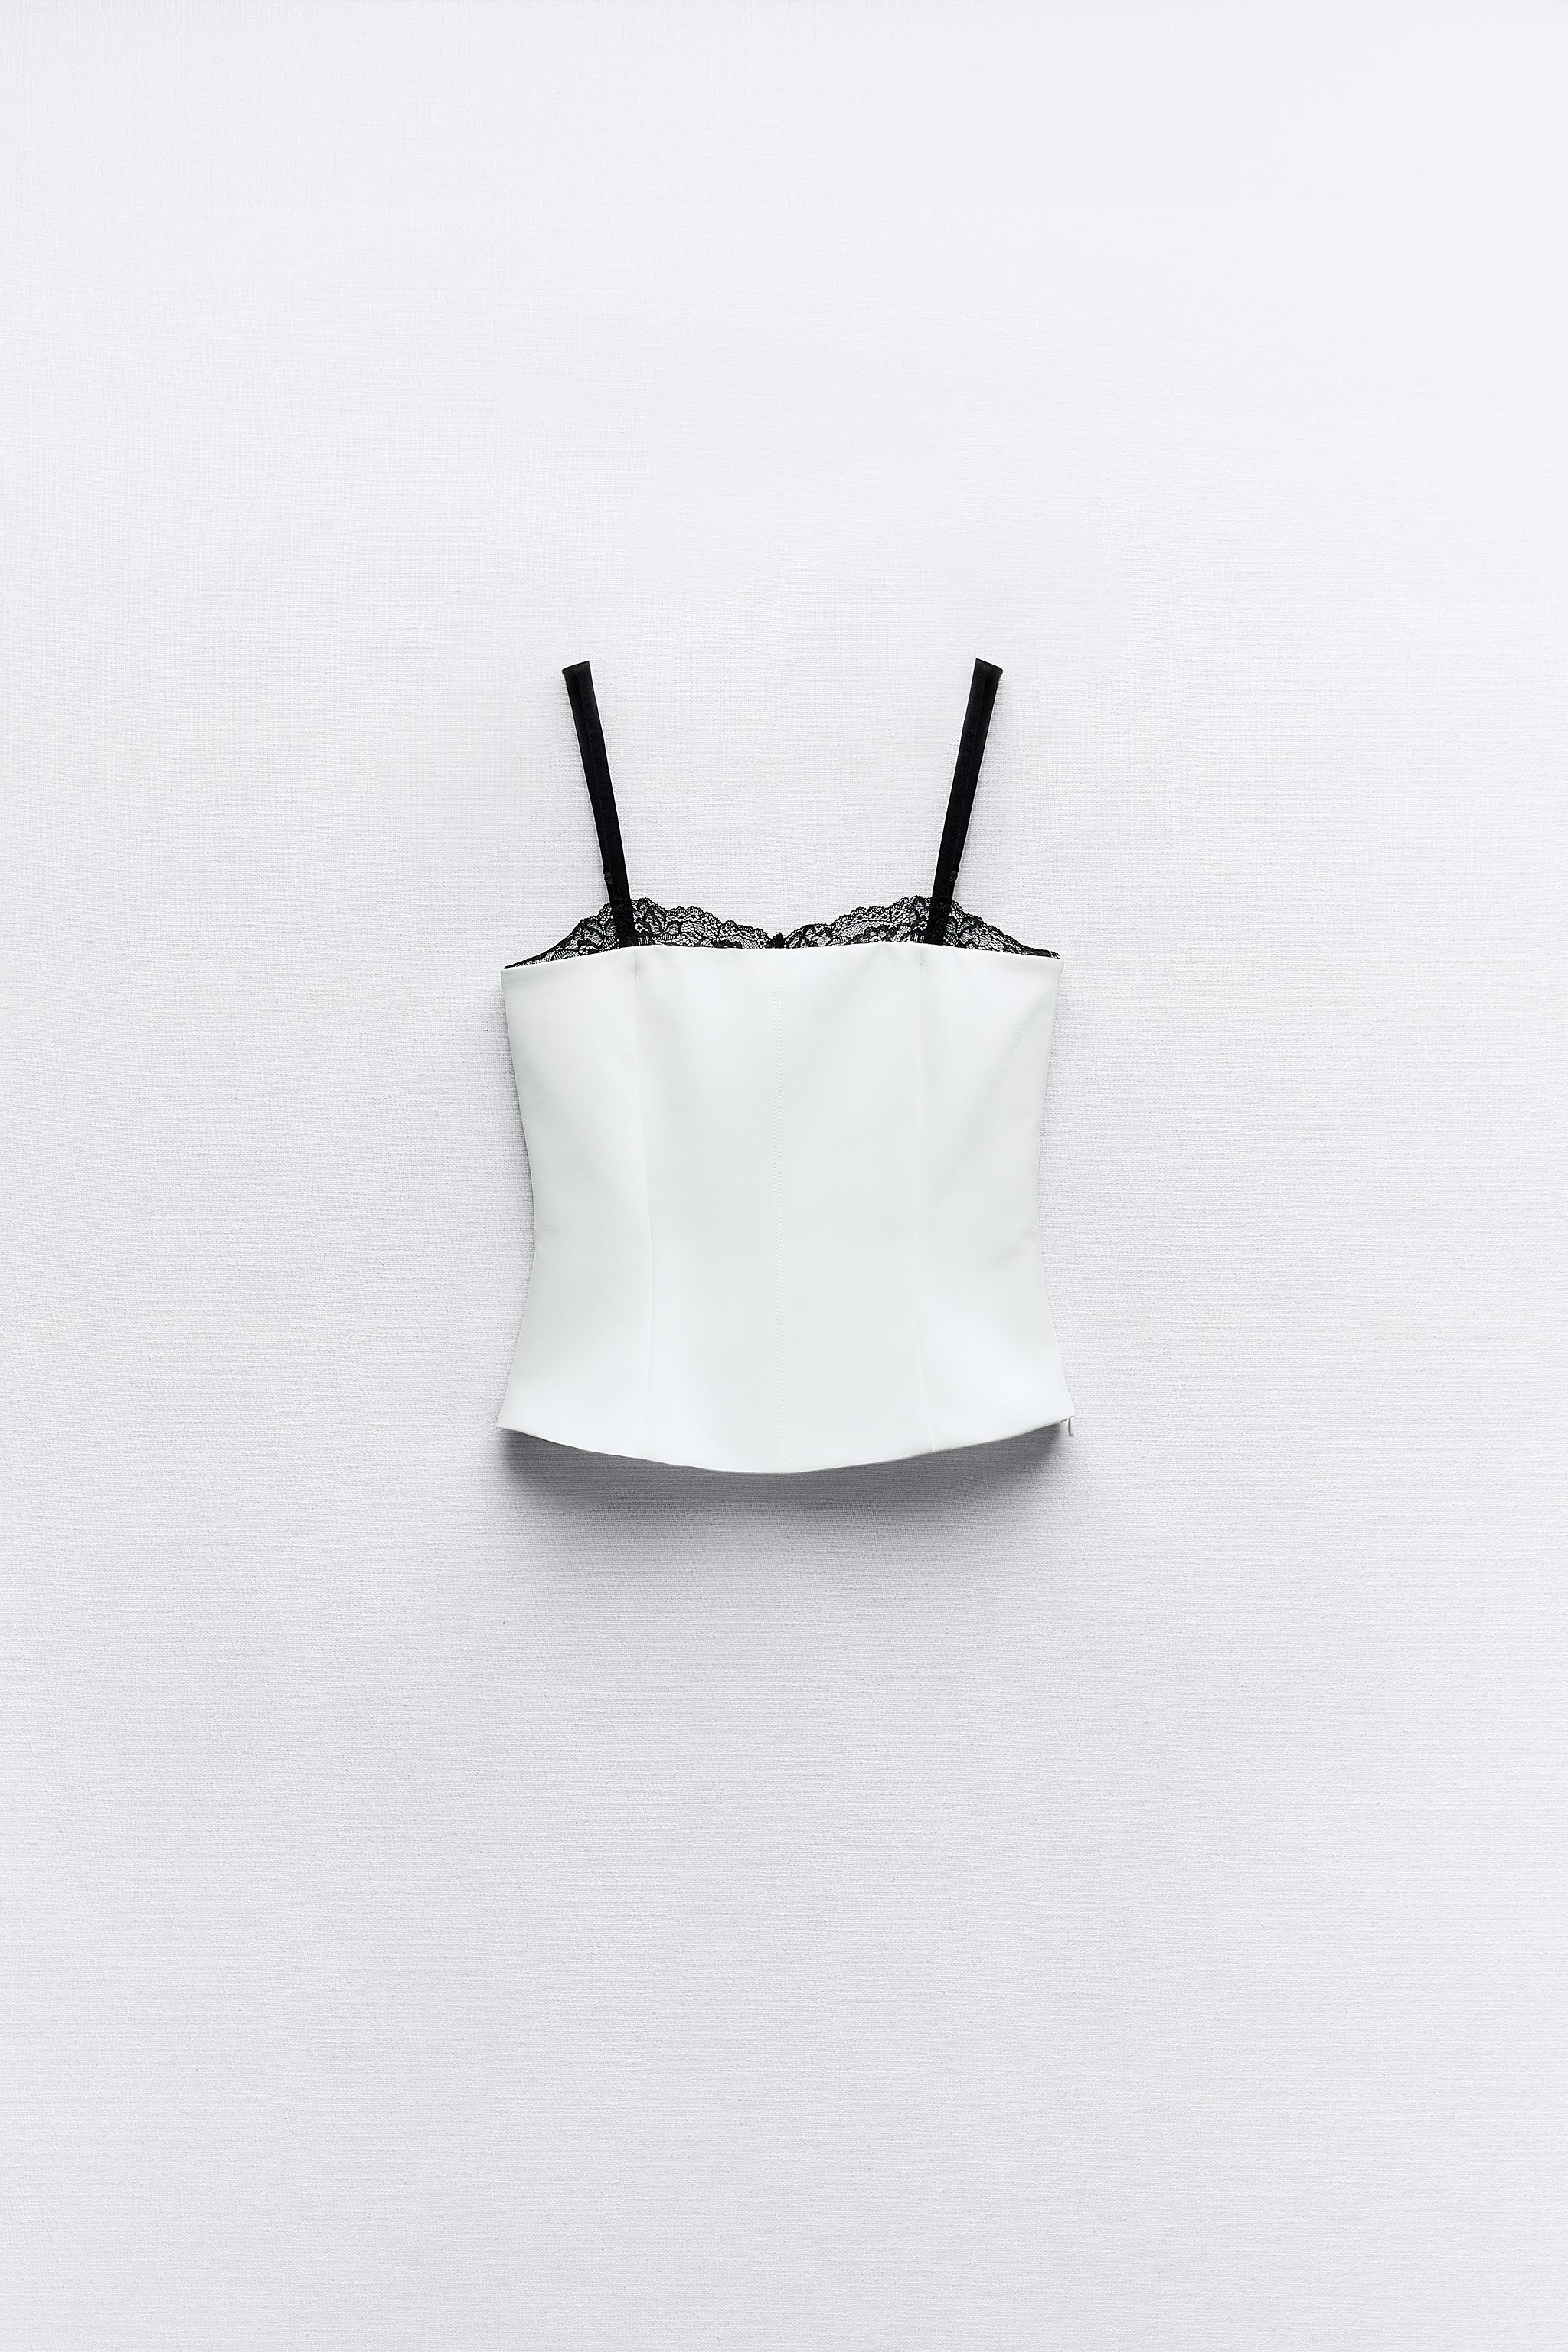 ZARA pink corset top - $32 (28% Off Retail) New With Tags - From Andrea